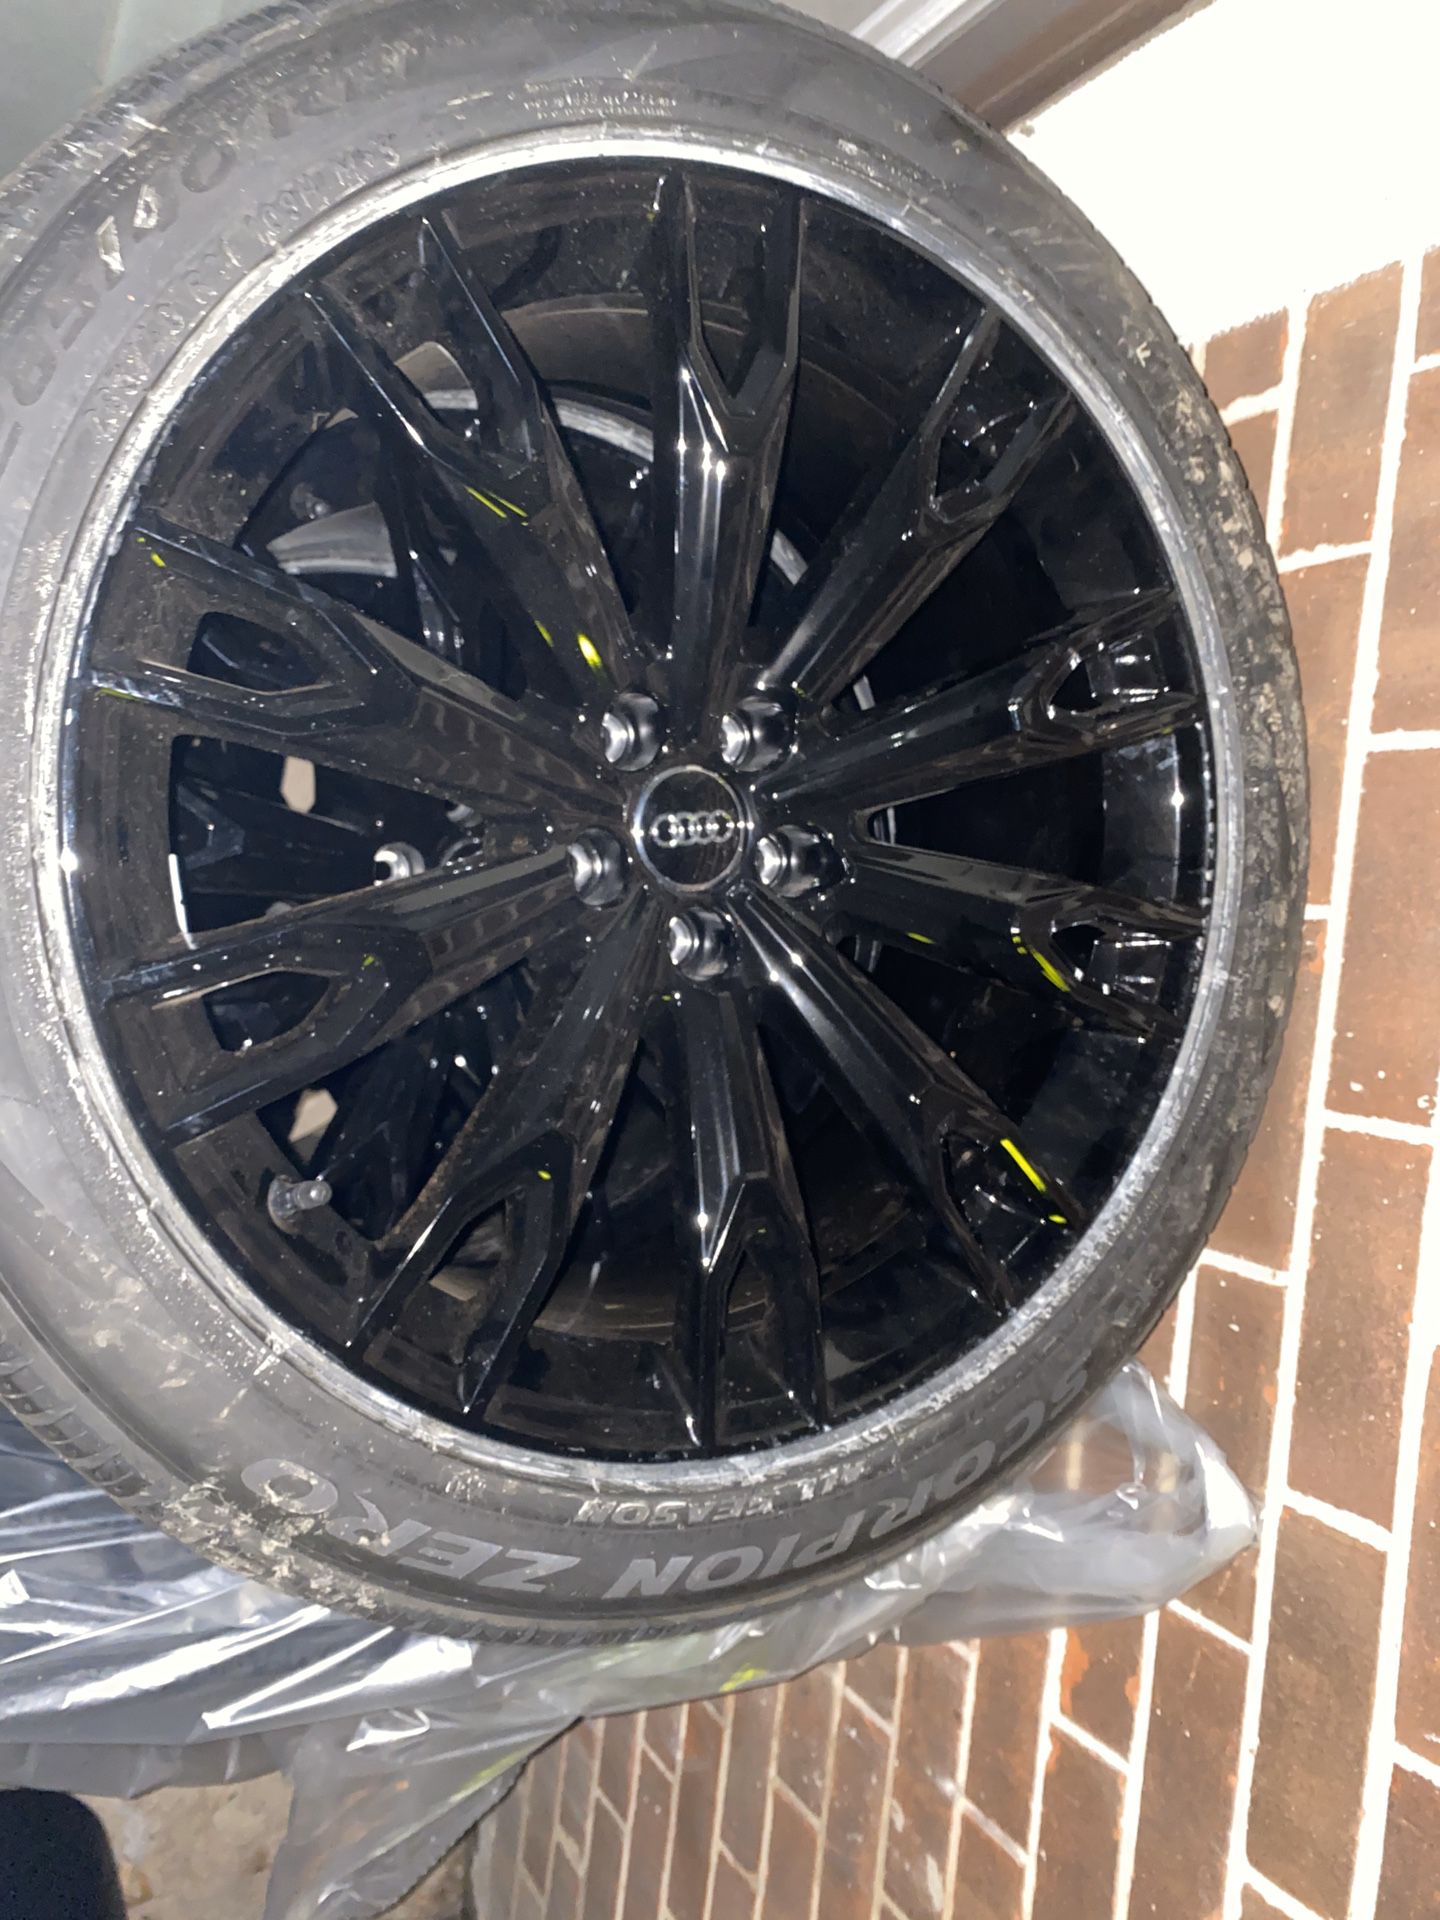 Brand new Audi OEM Q7 wheels and tires